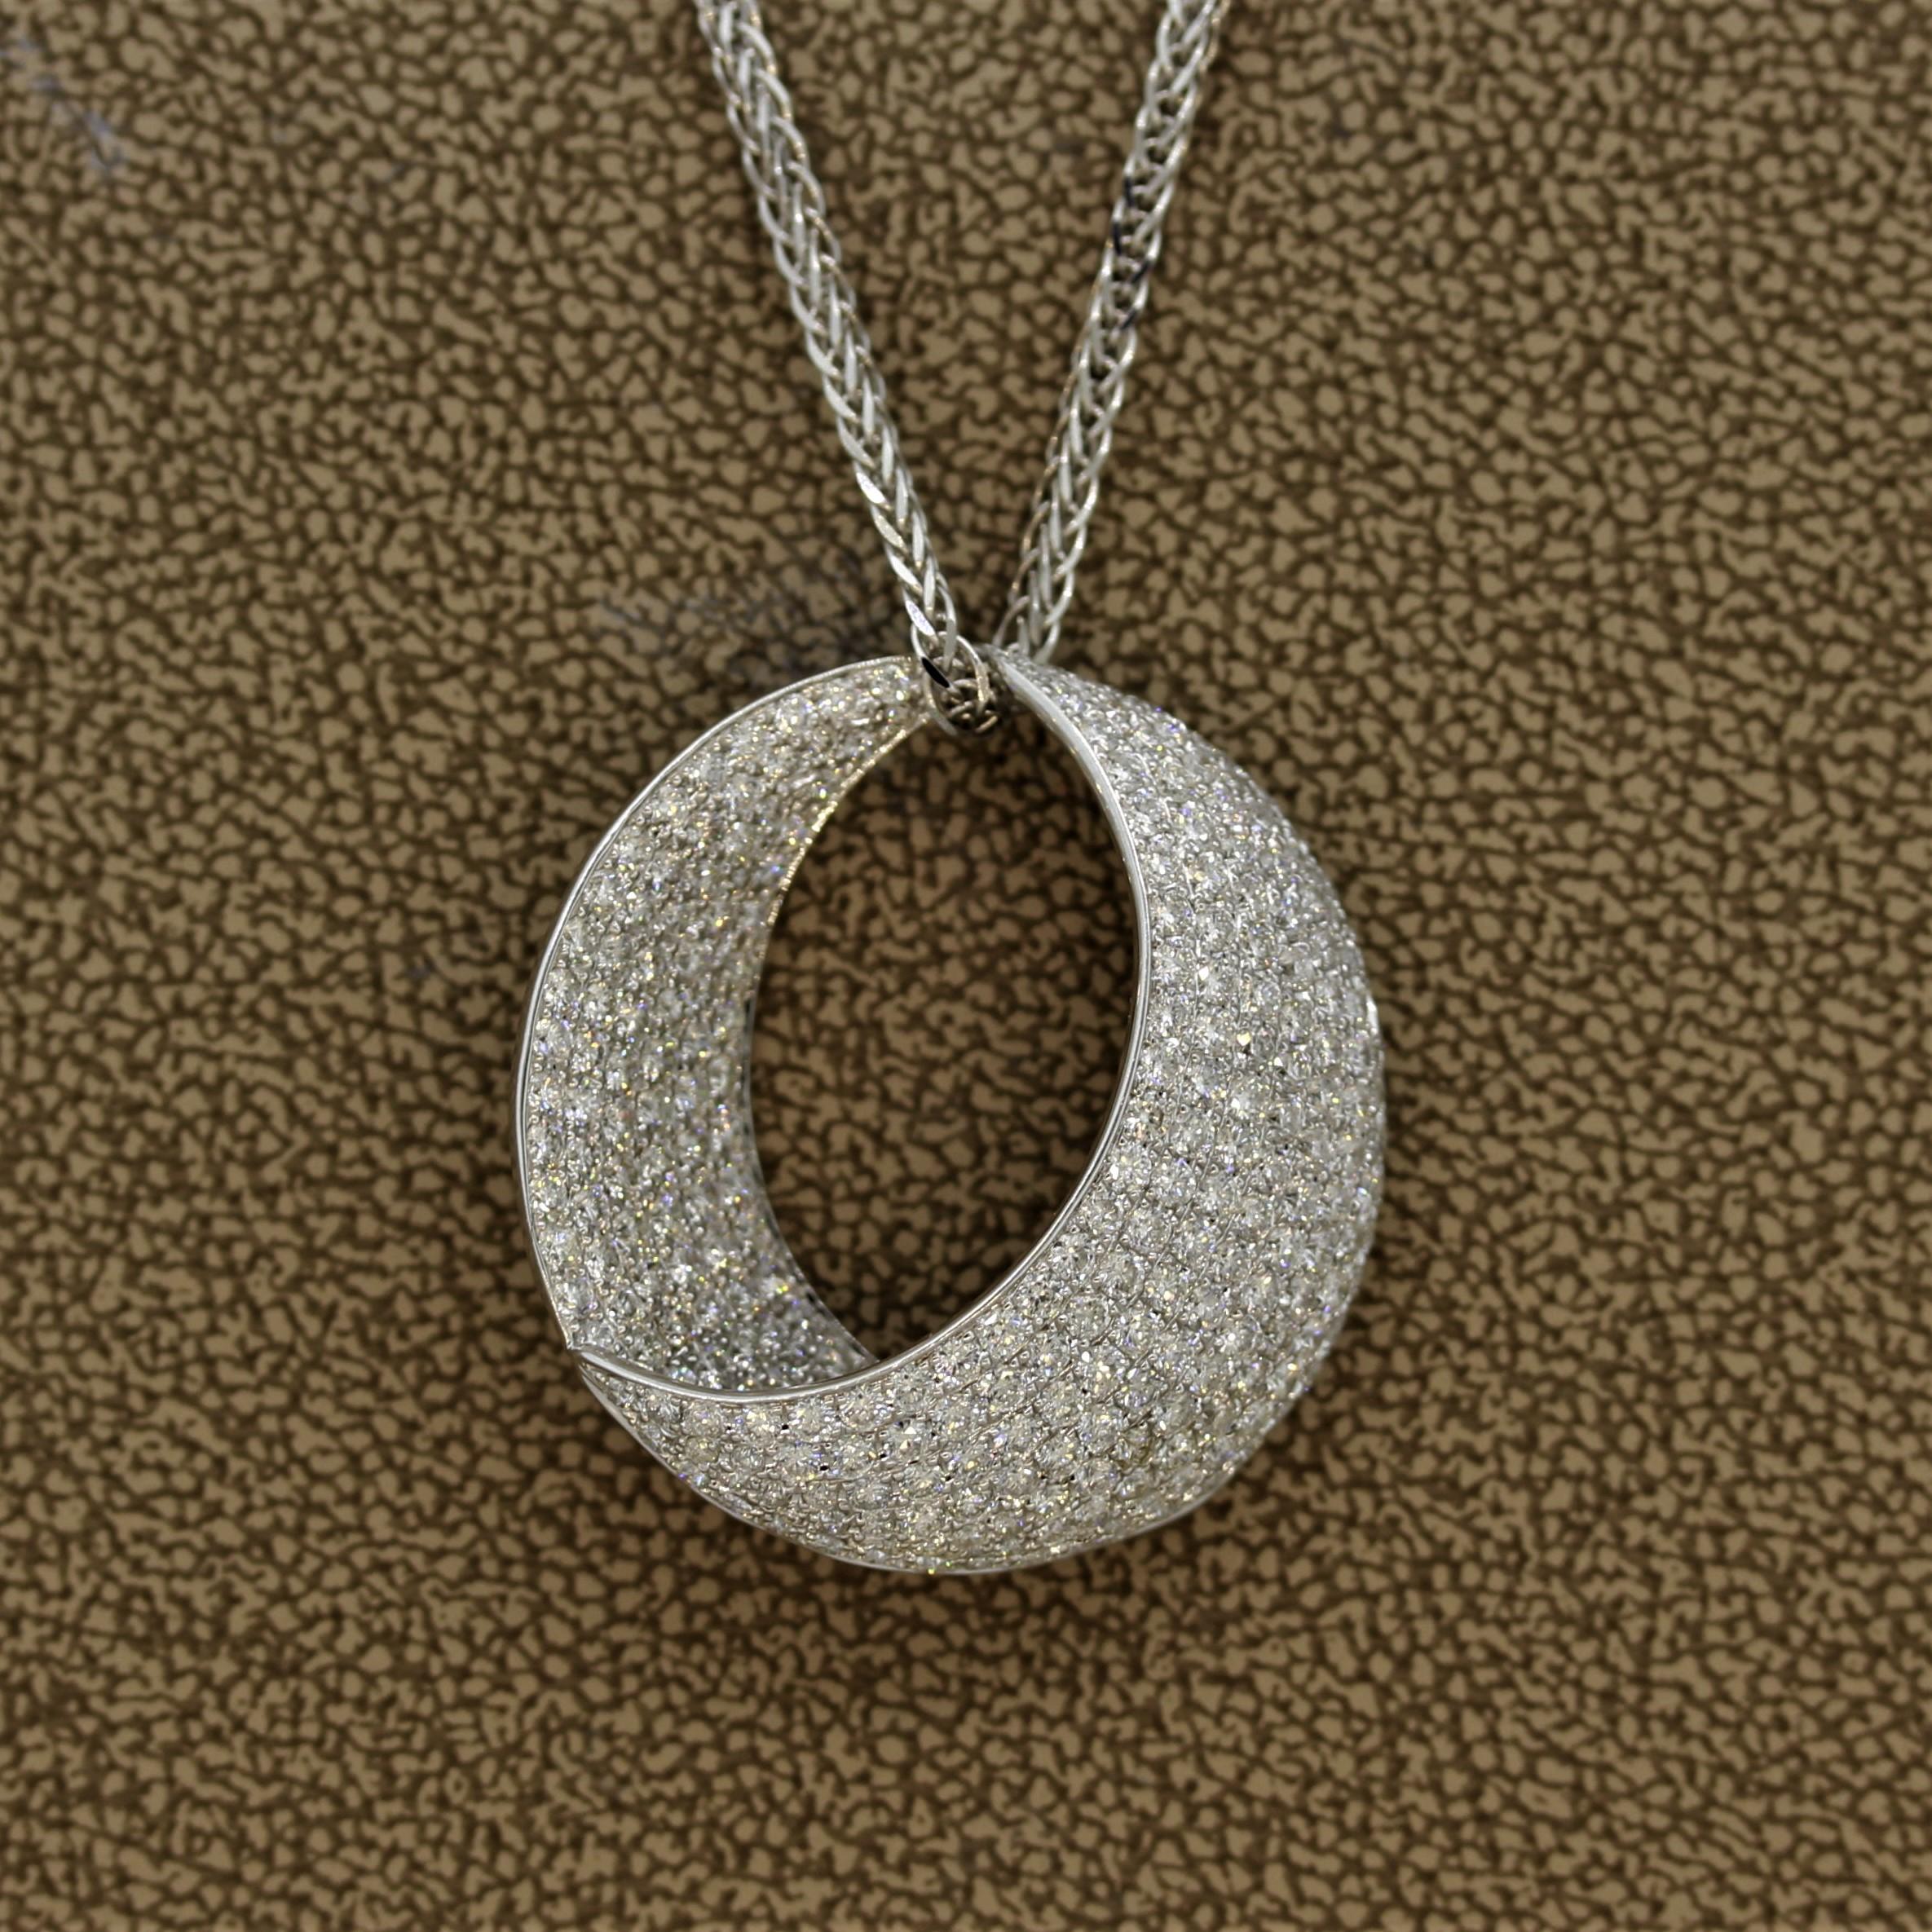 A lovely and finely made pendant featuring 4.70 carats of round brilliant cut diamonds with VS1-2 clarity. It is set in 18k white in a crescent shape.

Pendant Length: 1.1 inches

Chain Length: 16 inches